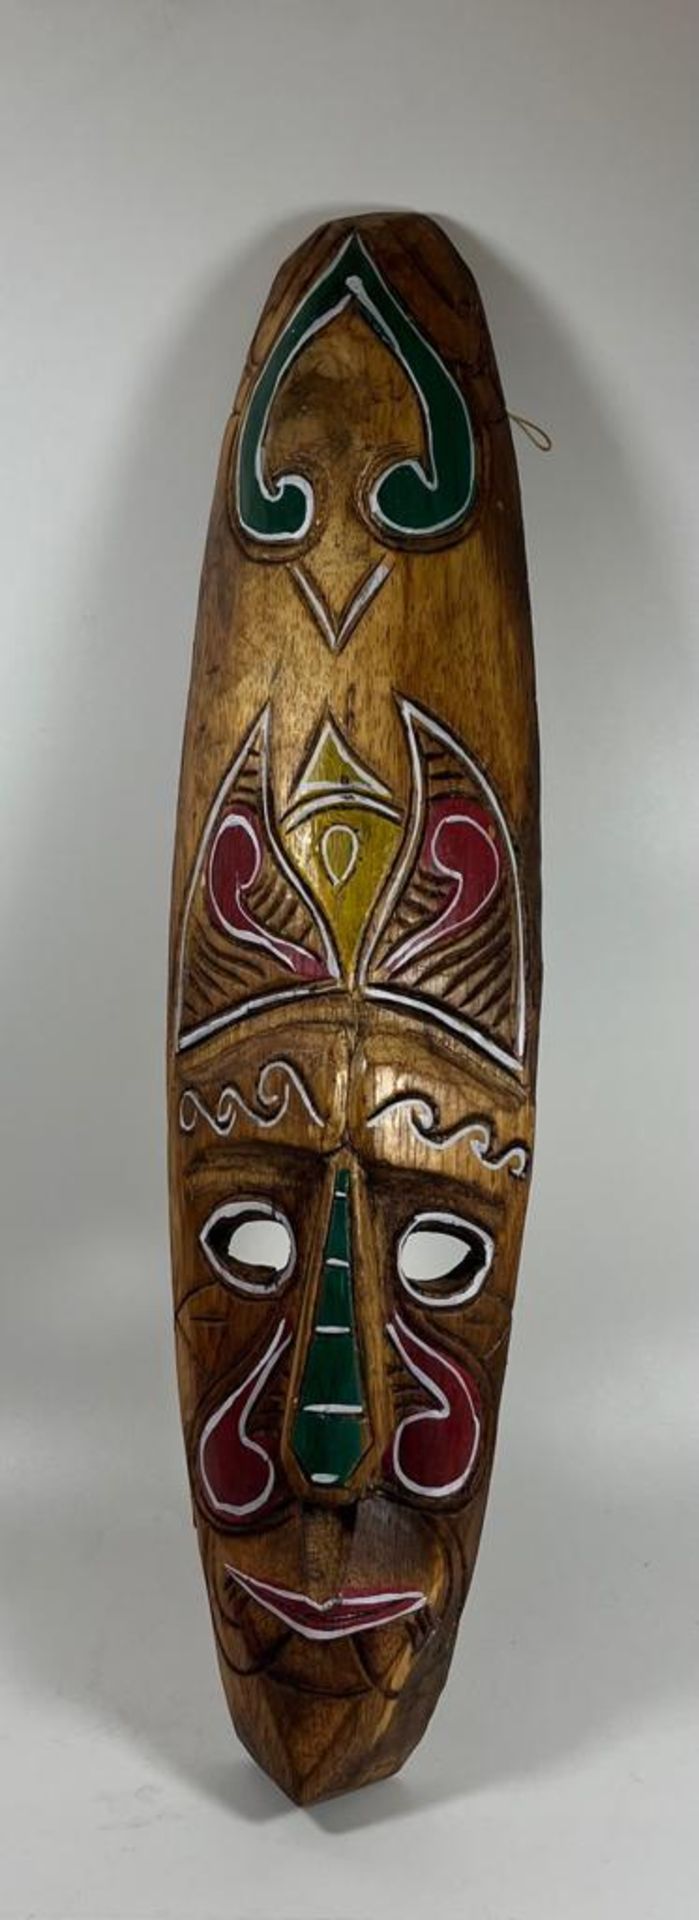 A LARGE VINTAGE AFRICAN PAINTED WOODEN TRIBAL MASK, LENGTH 49 CM